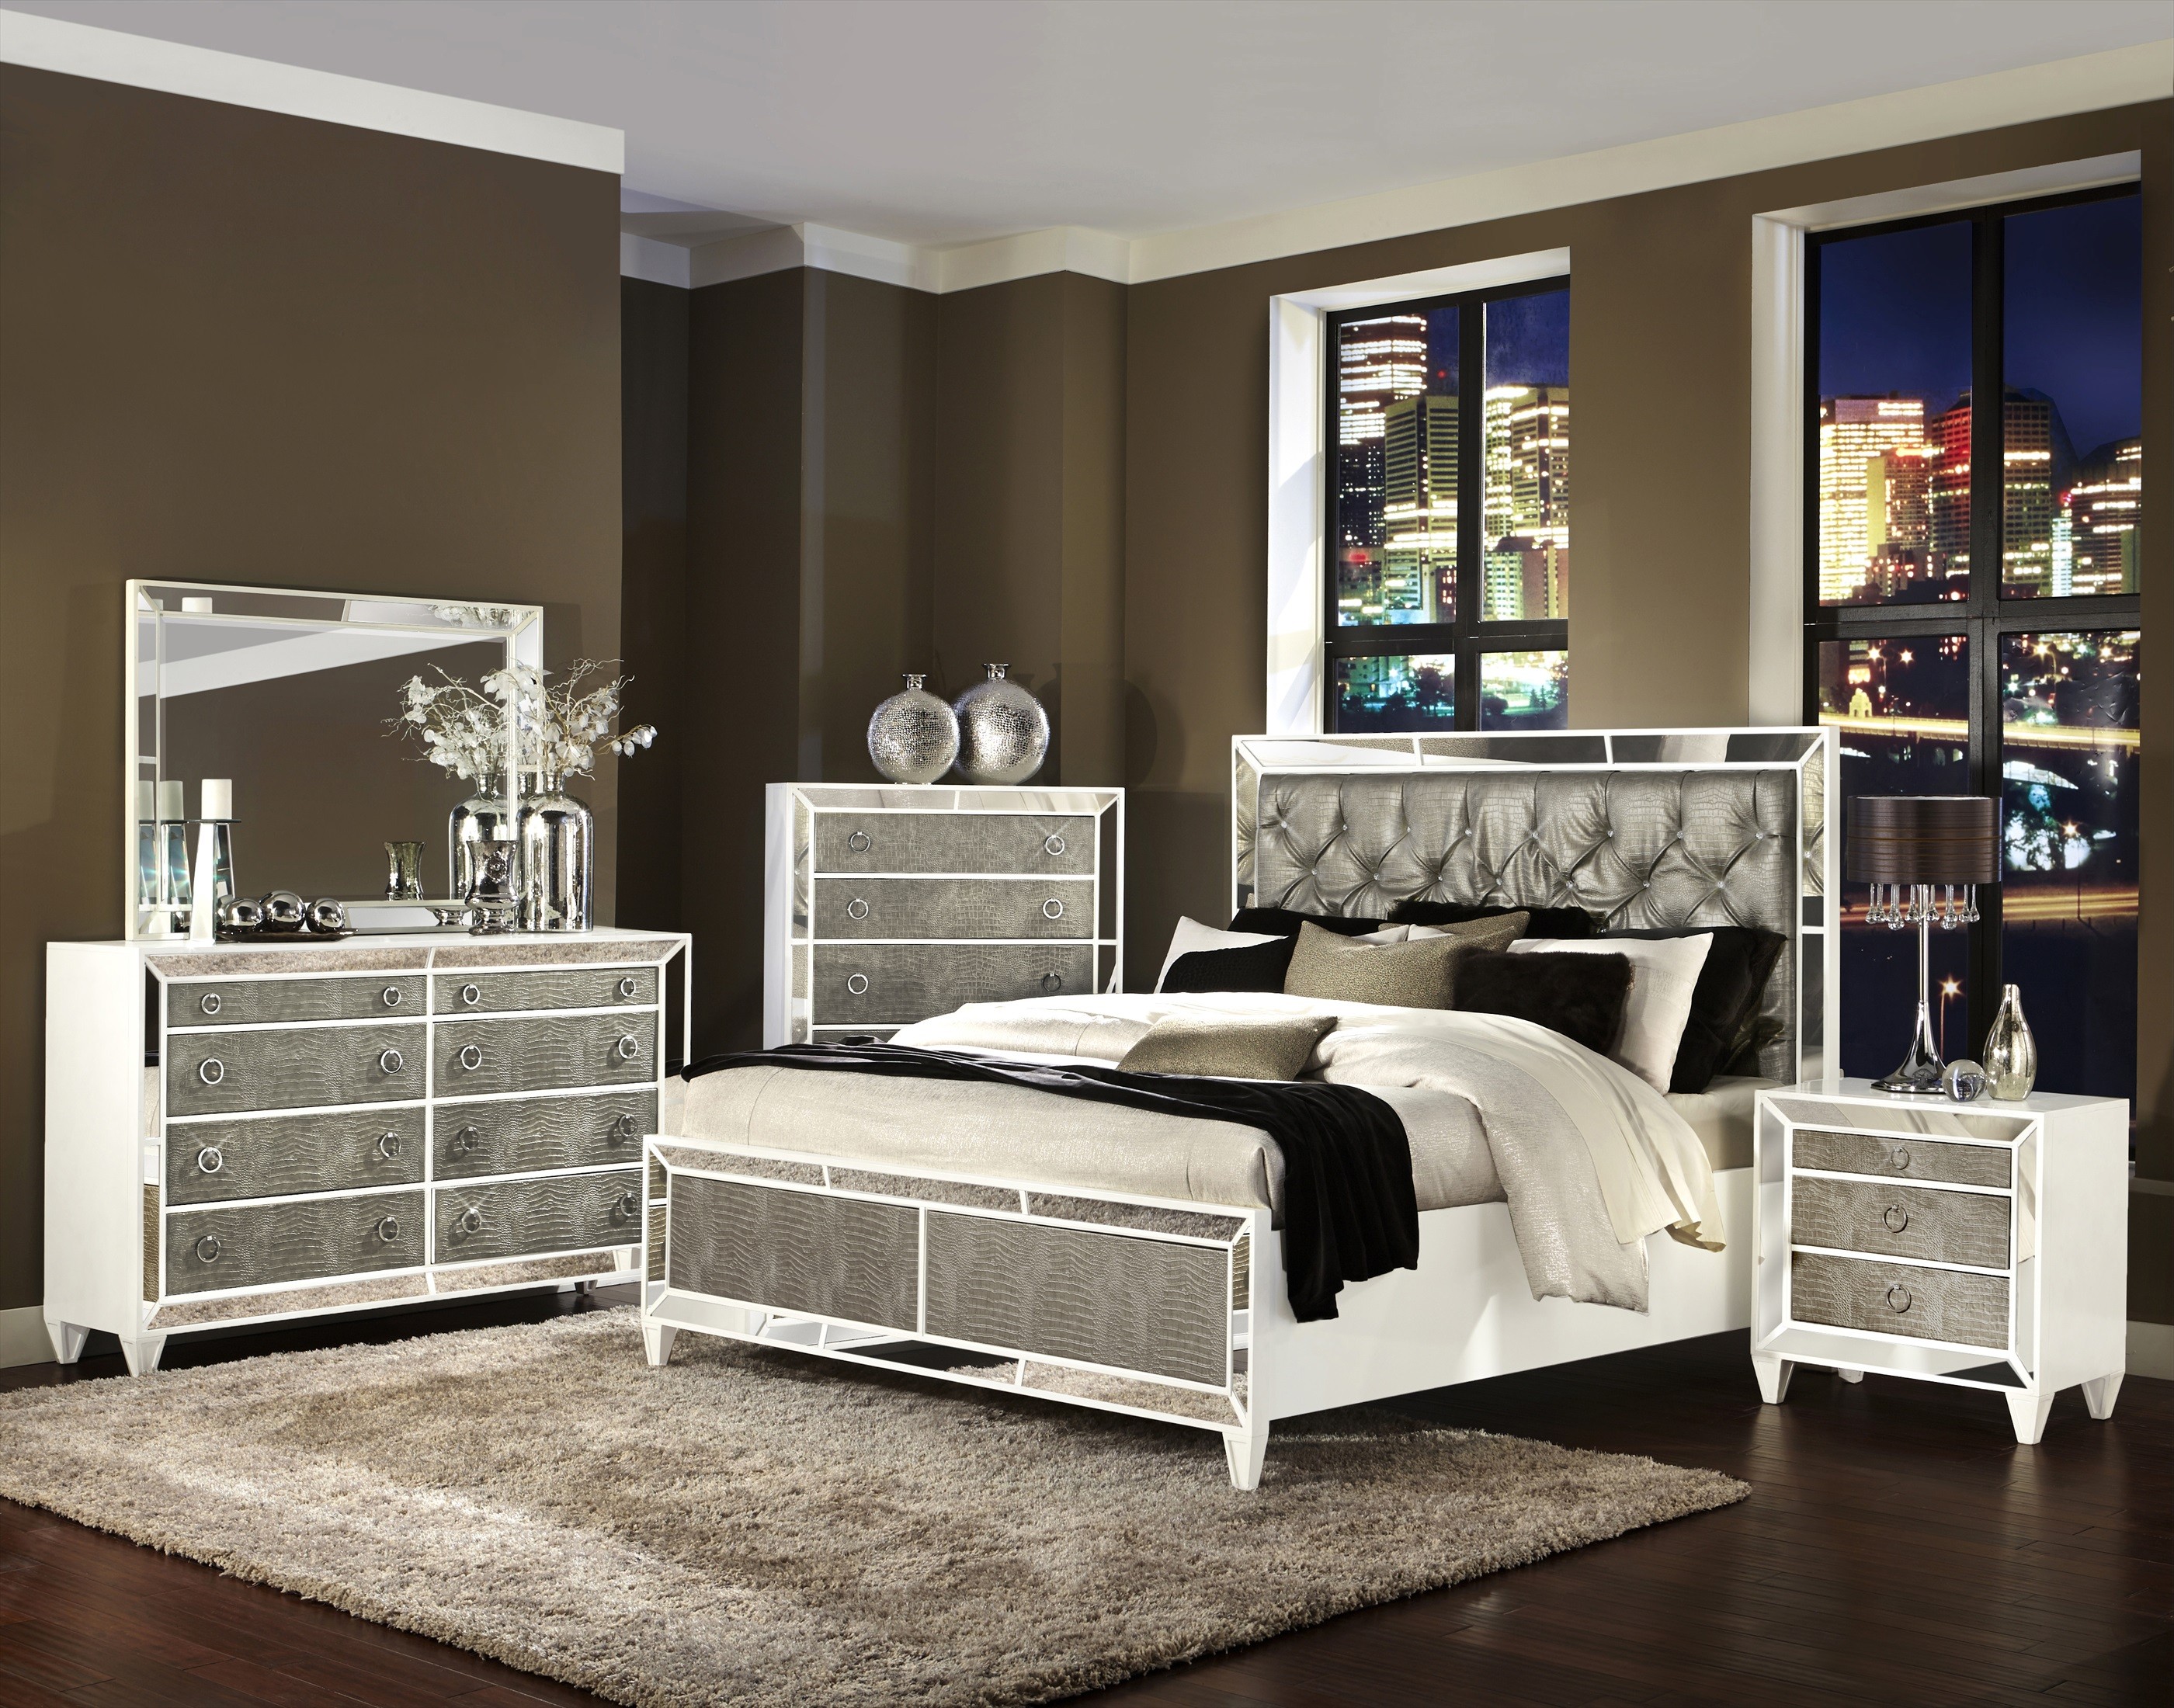 Bedroom Furniture Sets Silver and Mirrored Furniture Mirror and Wooden Dresser Mirrored Bedroom ISKDLLB